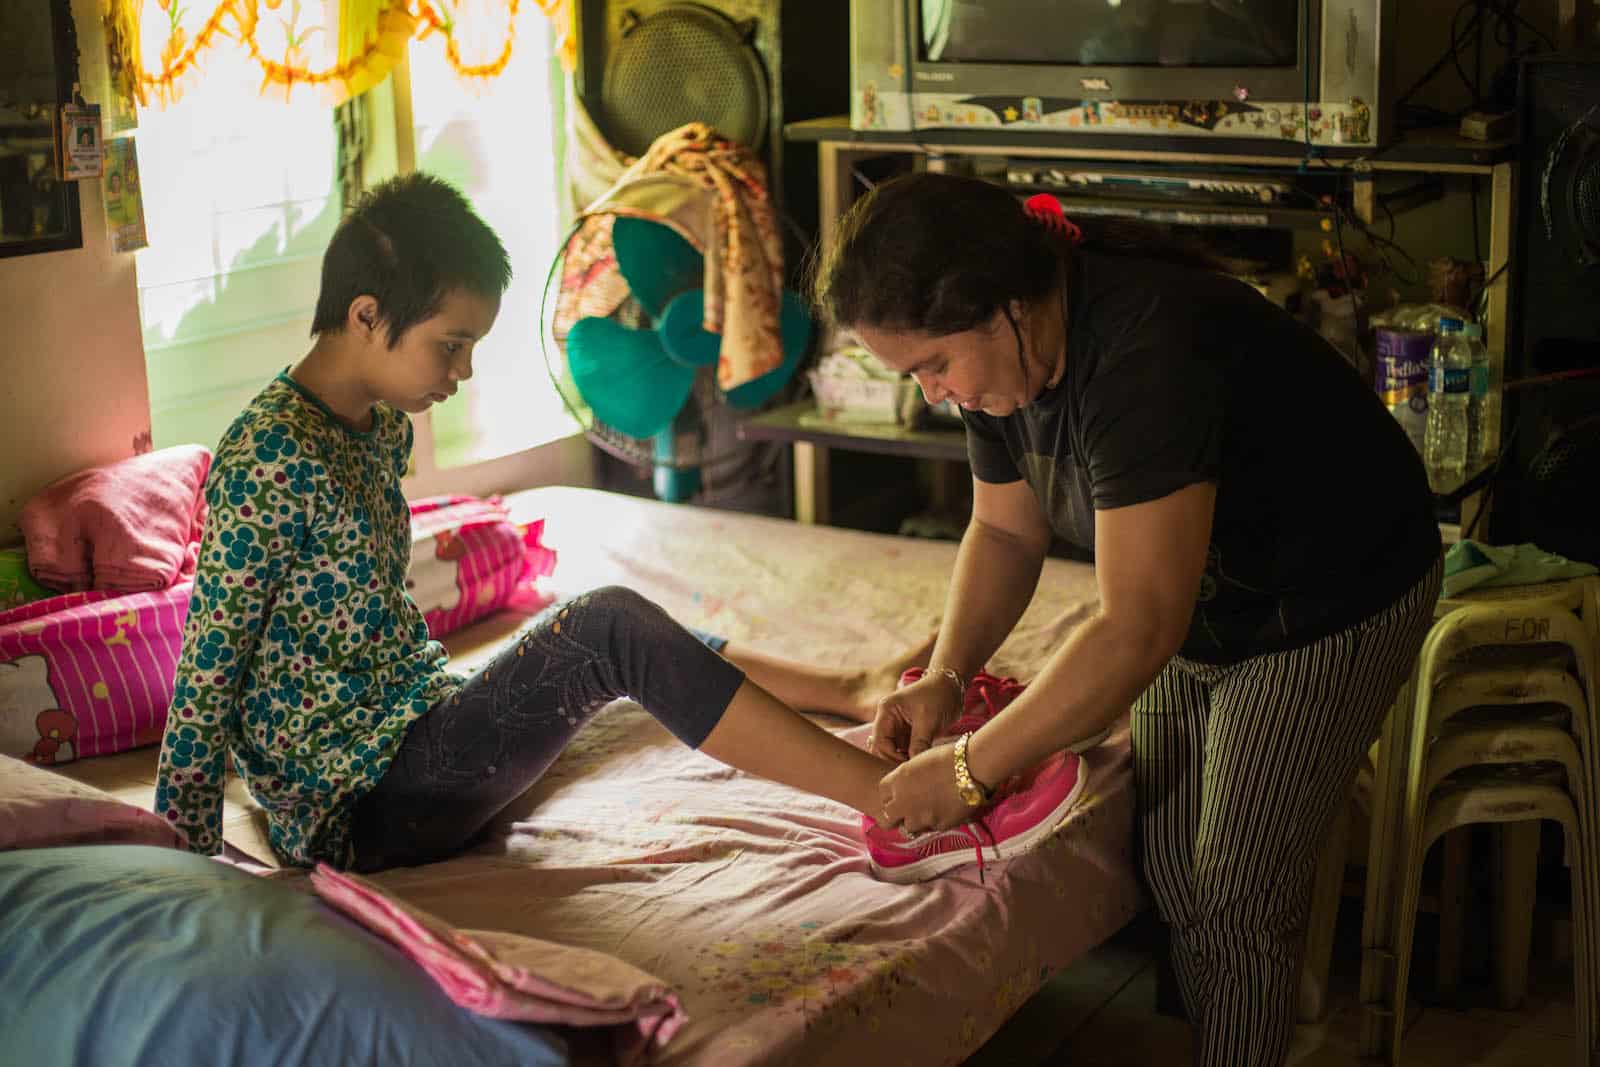 A woman ties a girl's shoes, sitting on a bed.